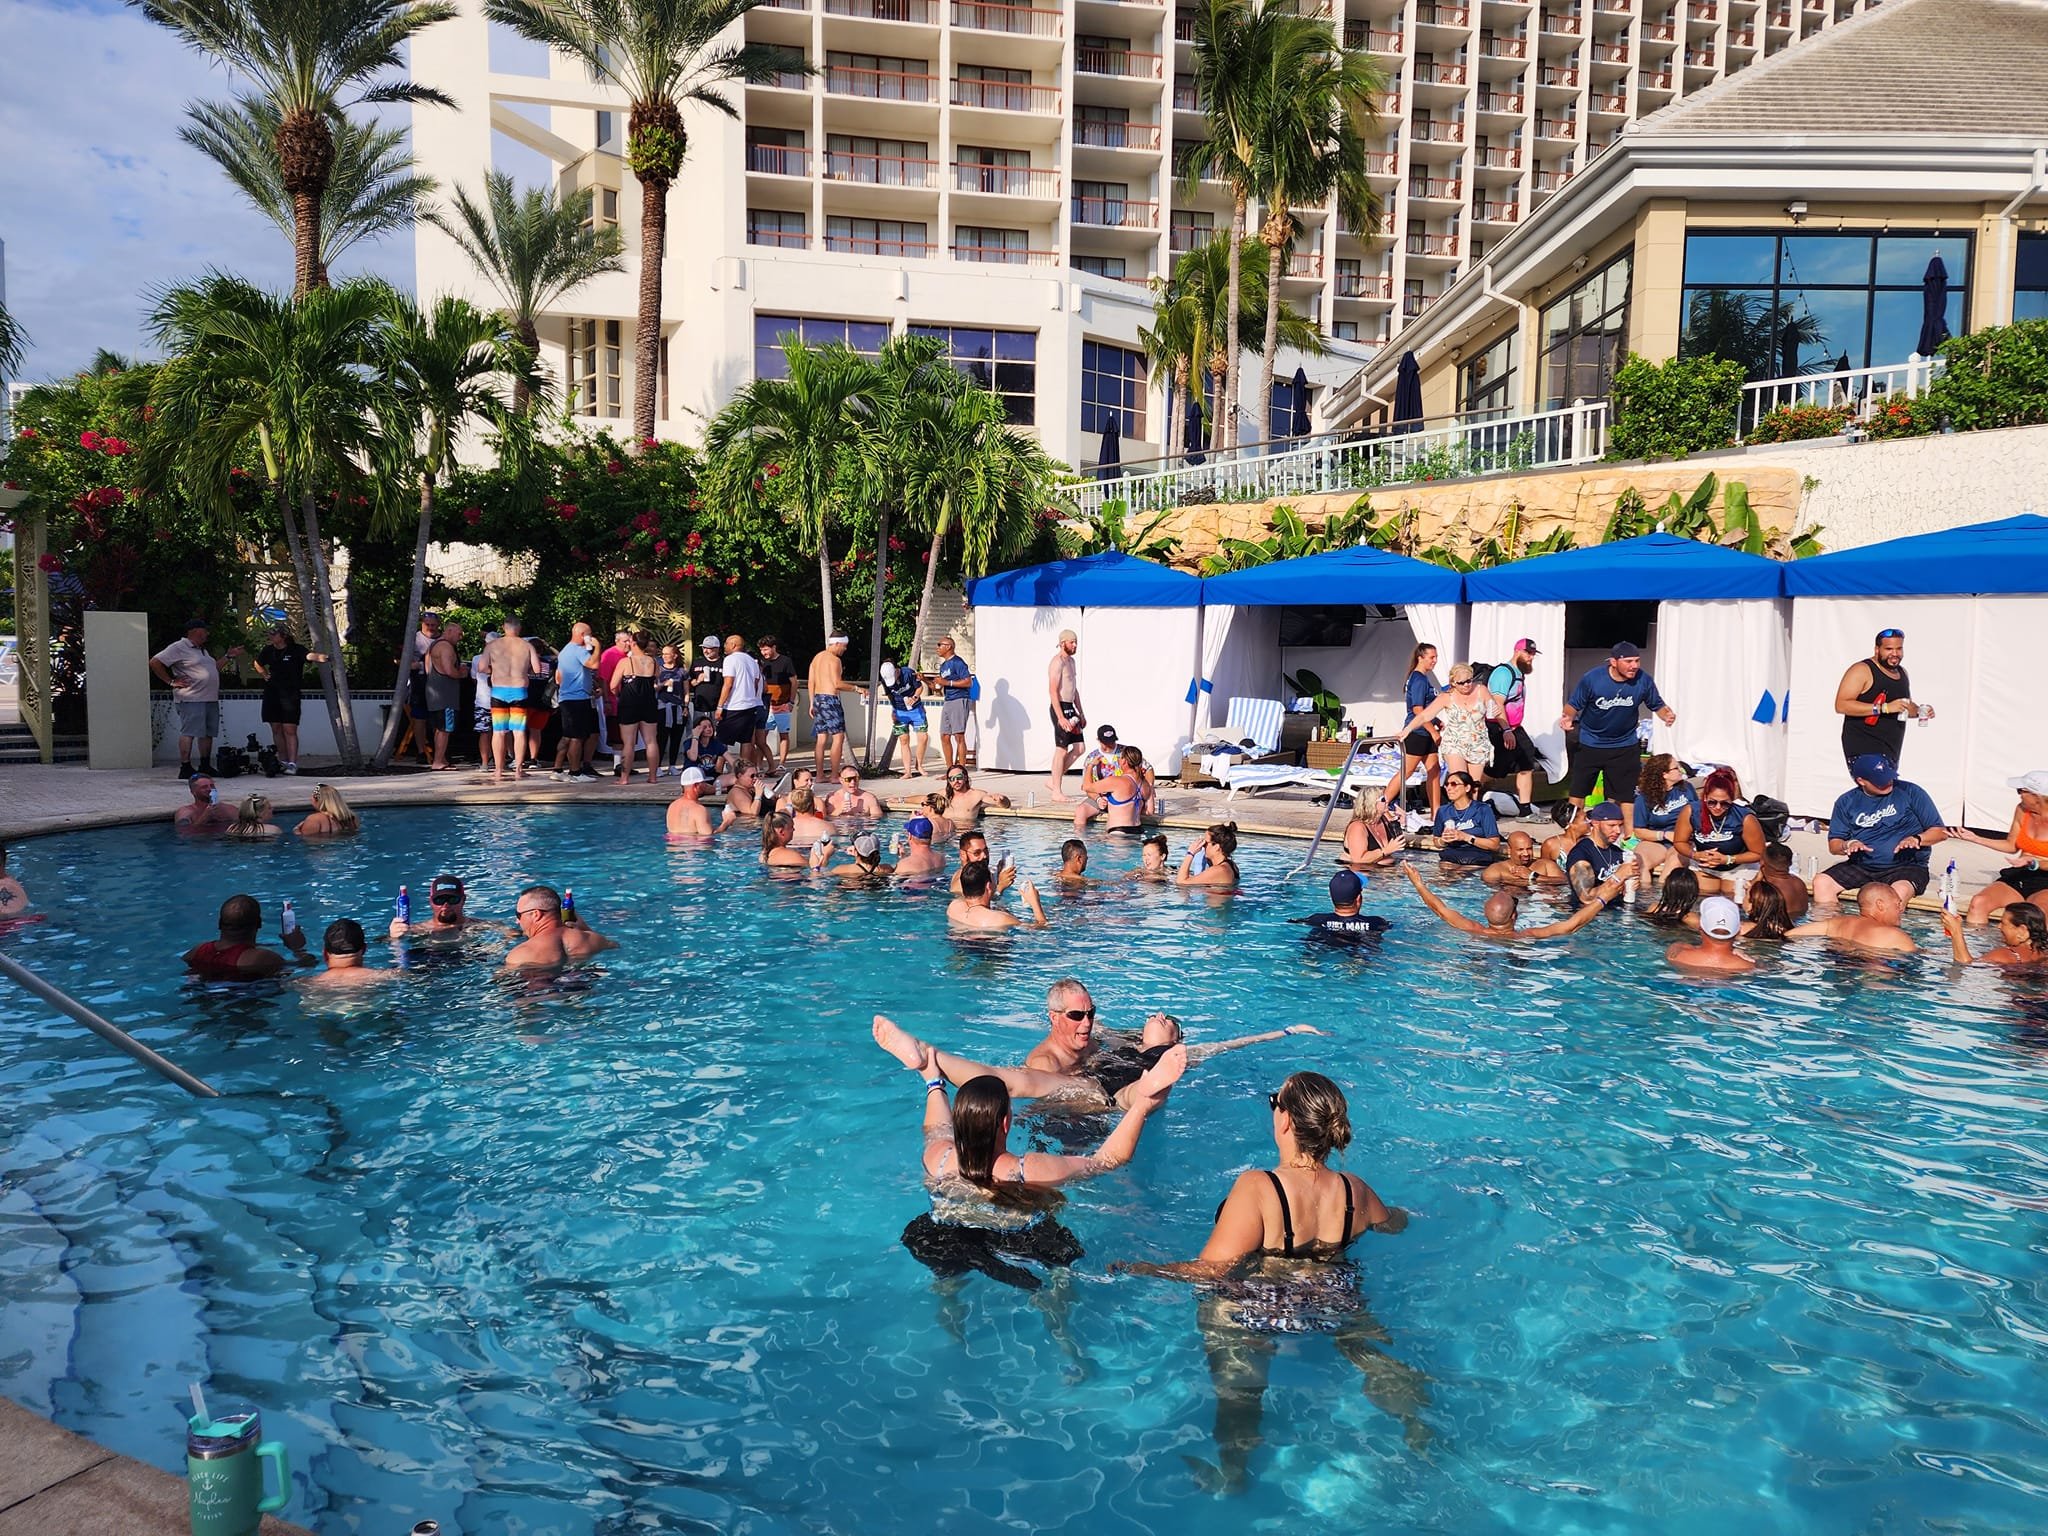 Pool - Lots of people in the pool - identify all of them earn a free trip.jpg